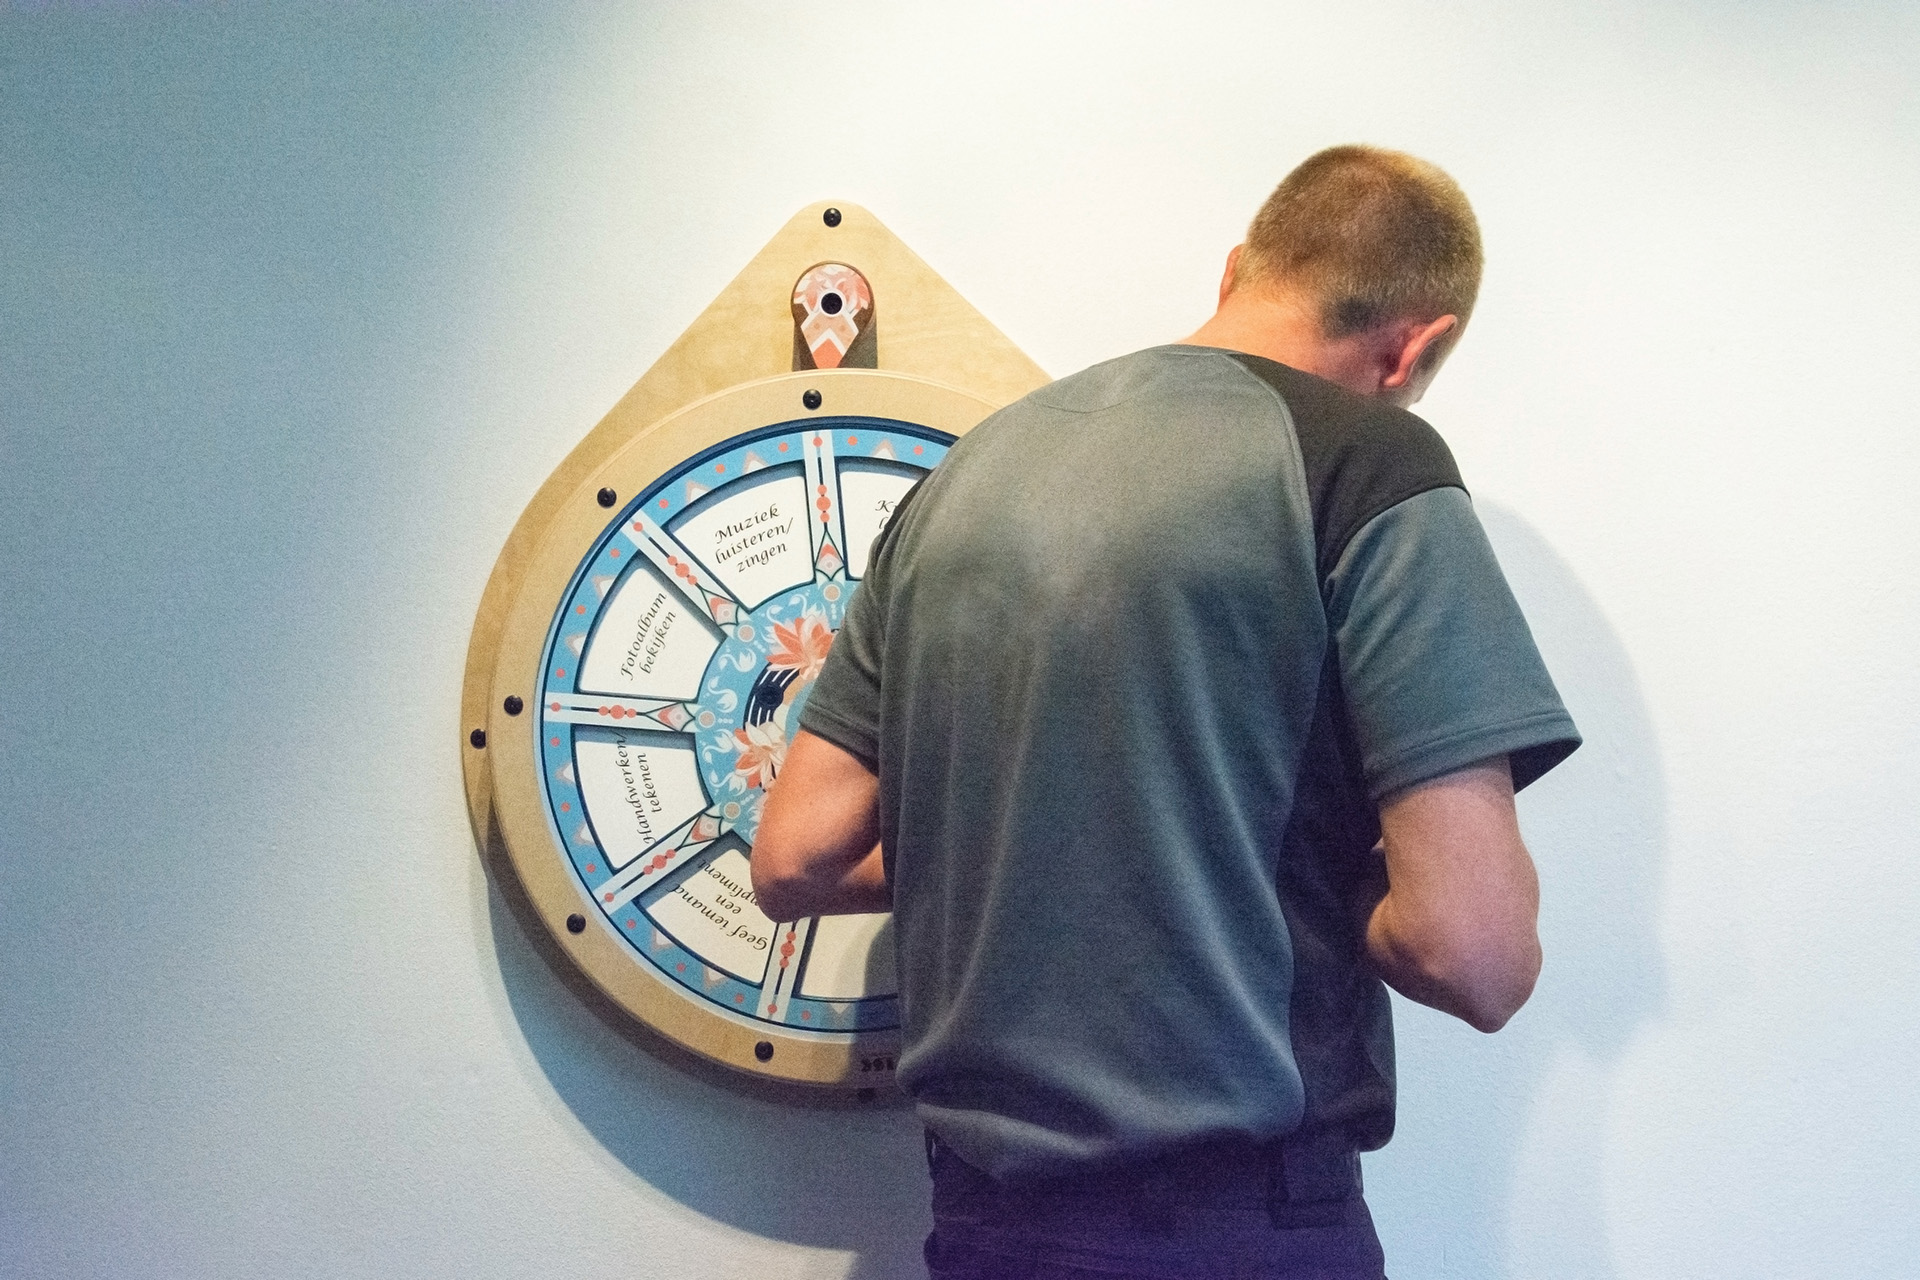 Assemblers mount wall games in care home